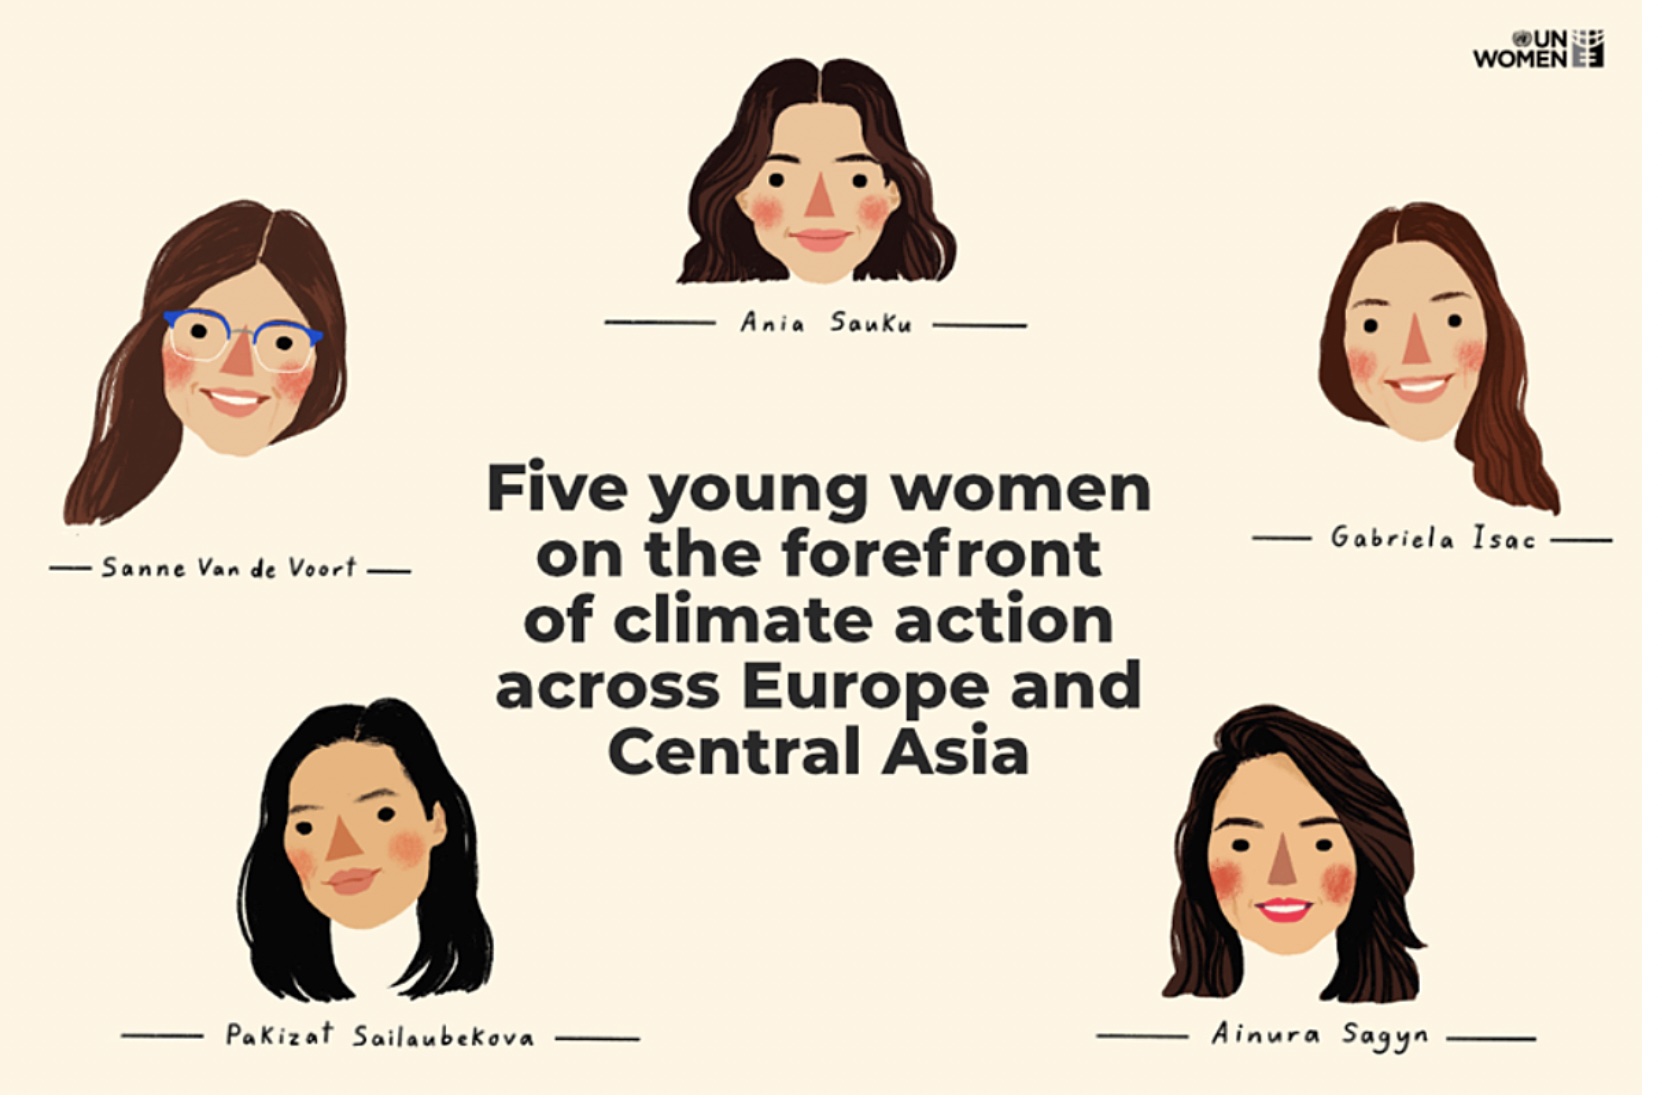 UN Women : Five young women on the forefront of climate action across Europe and Central Asia